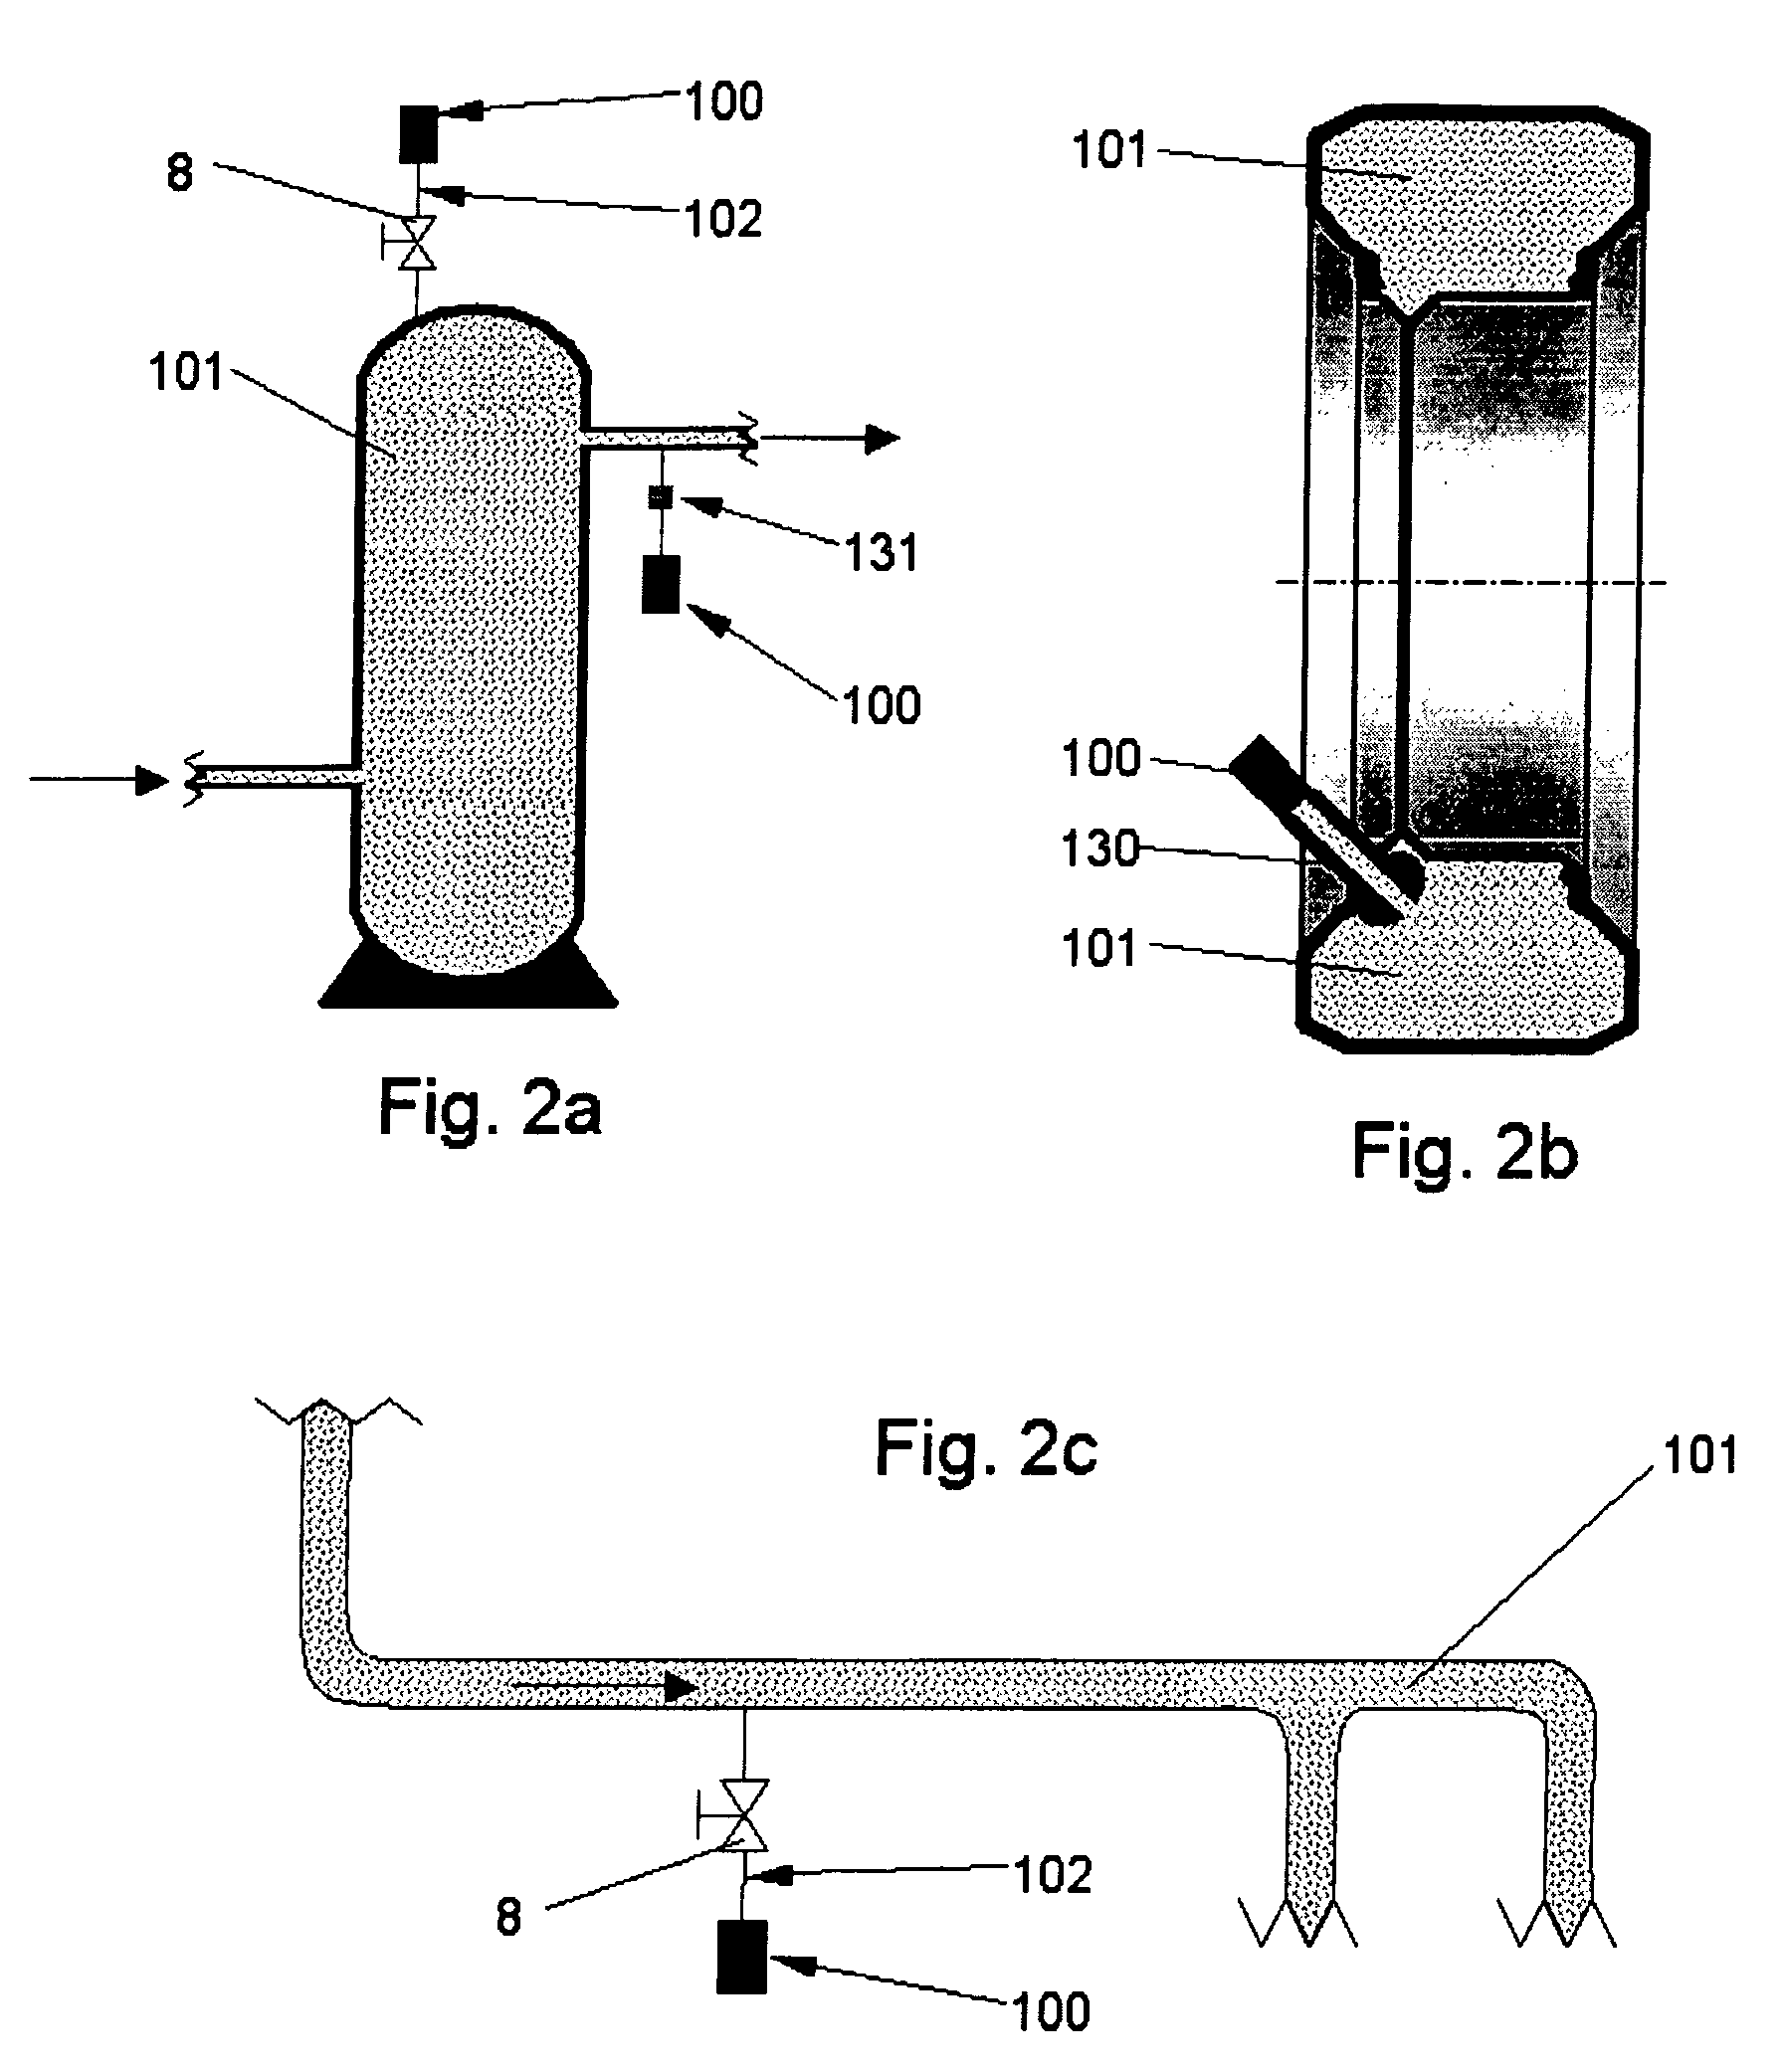 Device for surveying the pressure of fluids housed in tanks or flowing through ducts